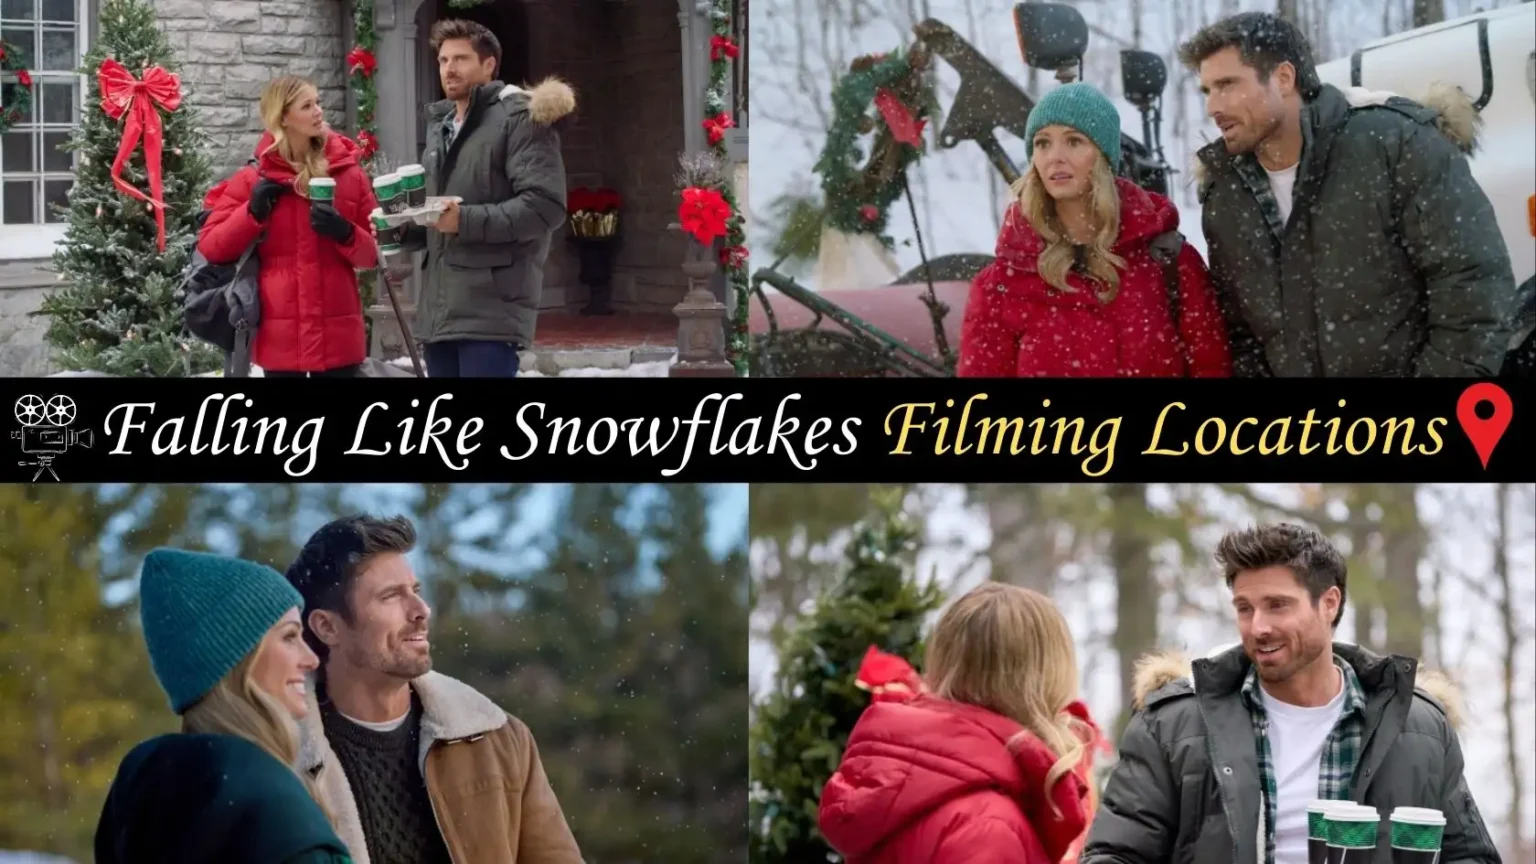 Falling Like Snowflakes Filming Locations